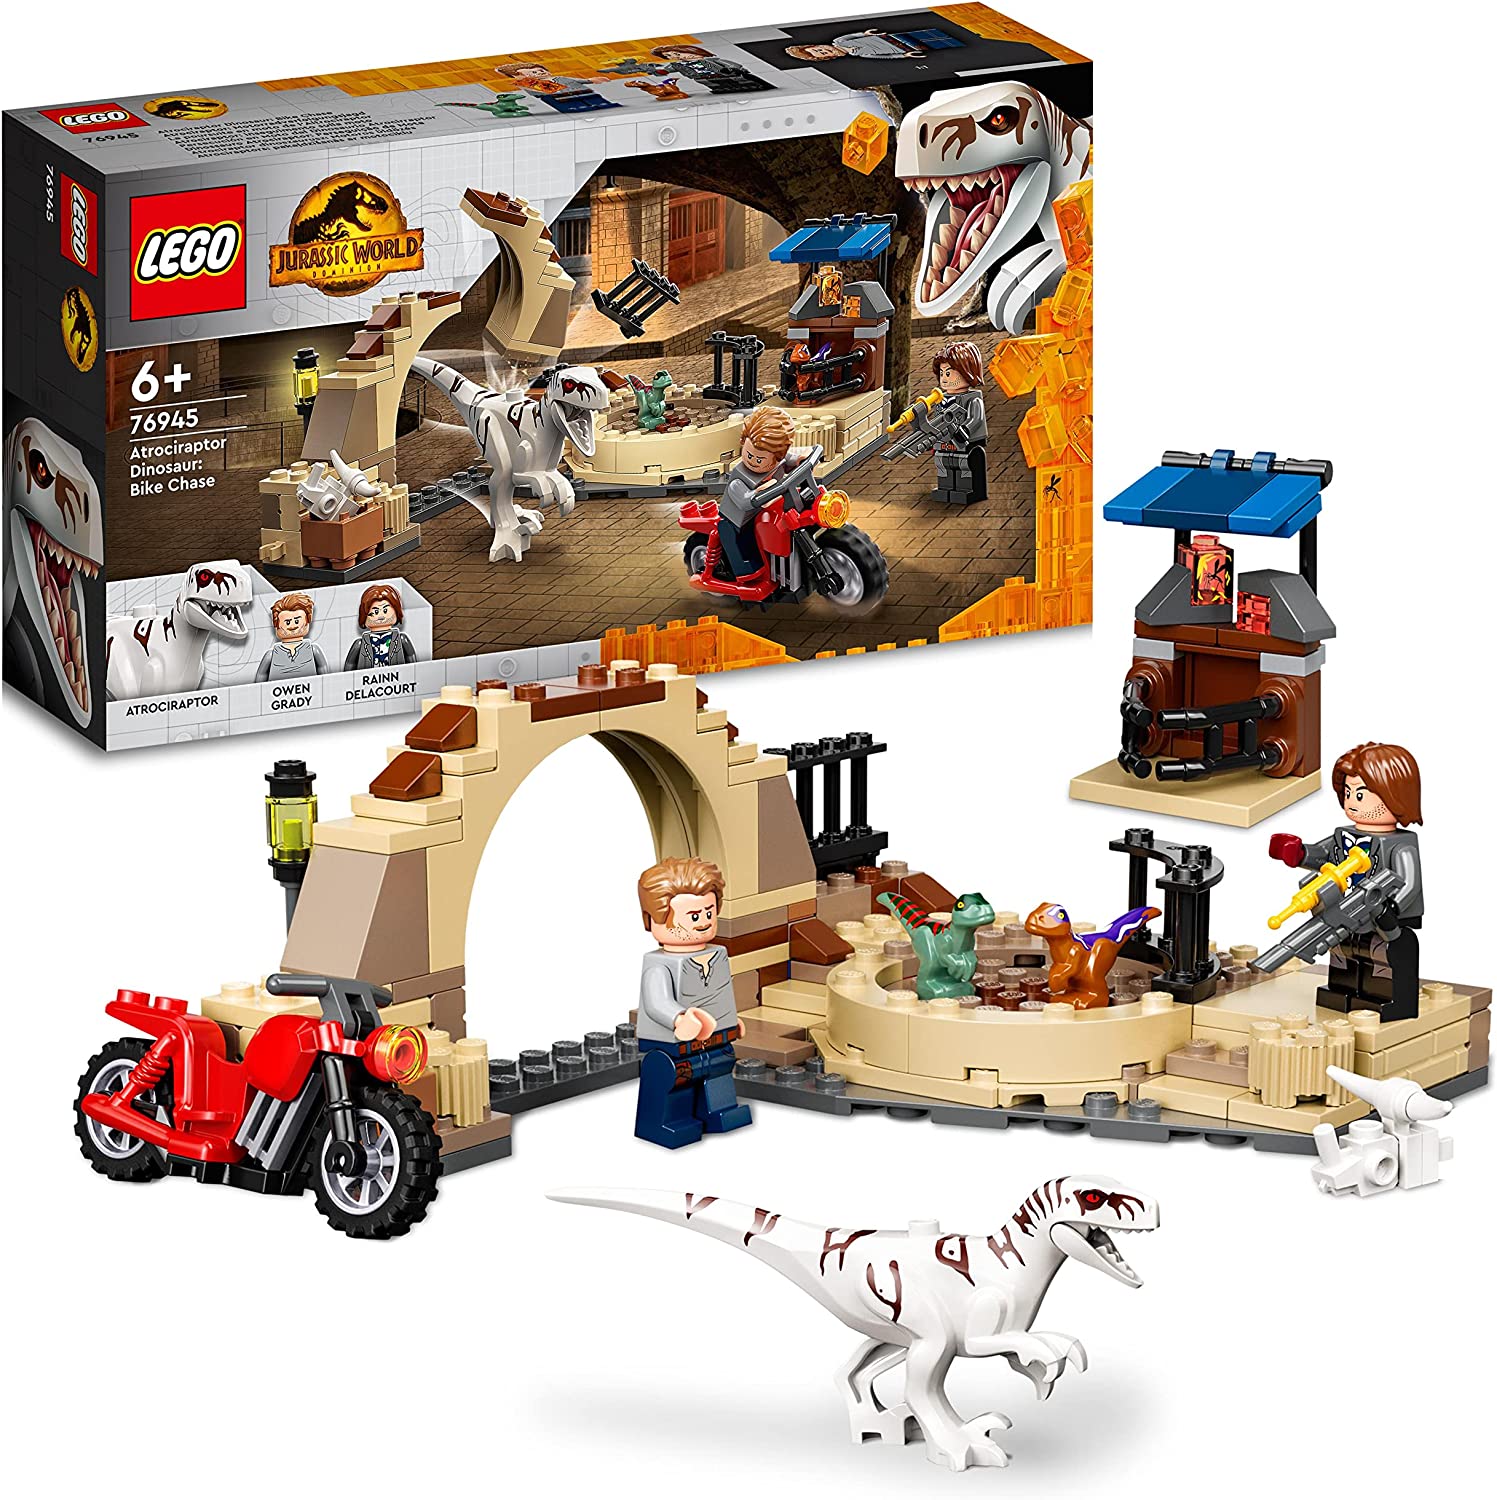 LEGO 76945 Jurassic World Atrociraptor: Motorcycle Tracking Hunt, Set of 3 Dinosaur Figures and Toy Motorcycle for Children from 6 Years